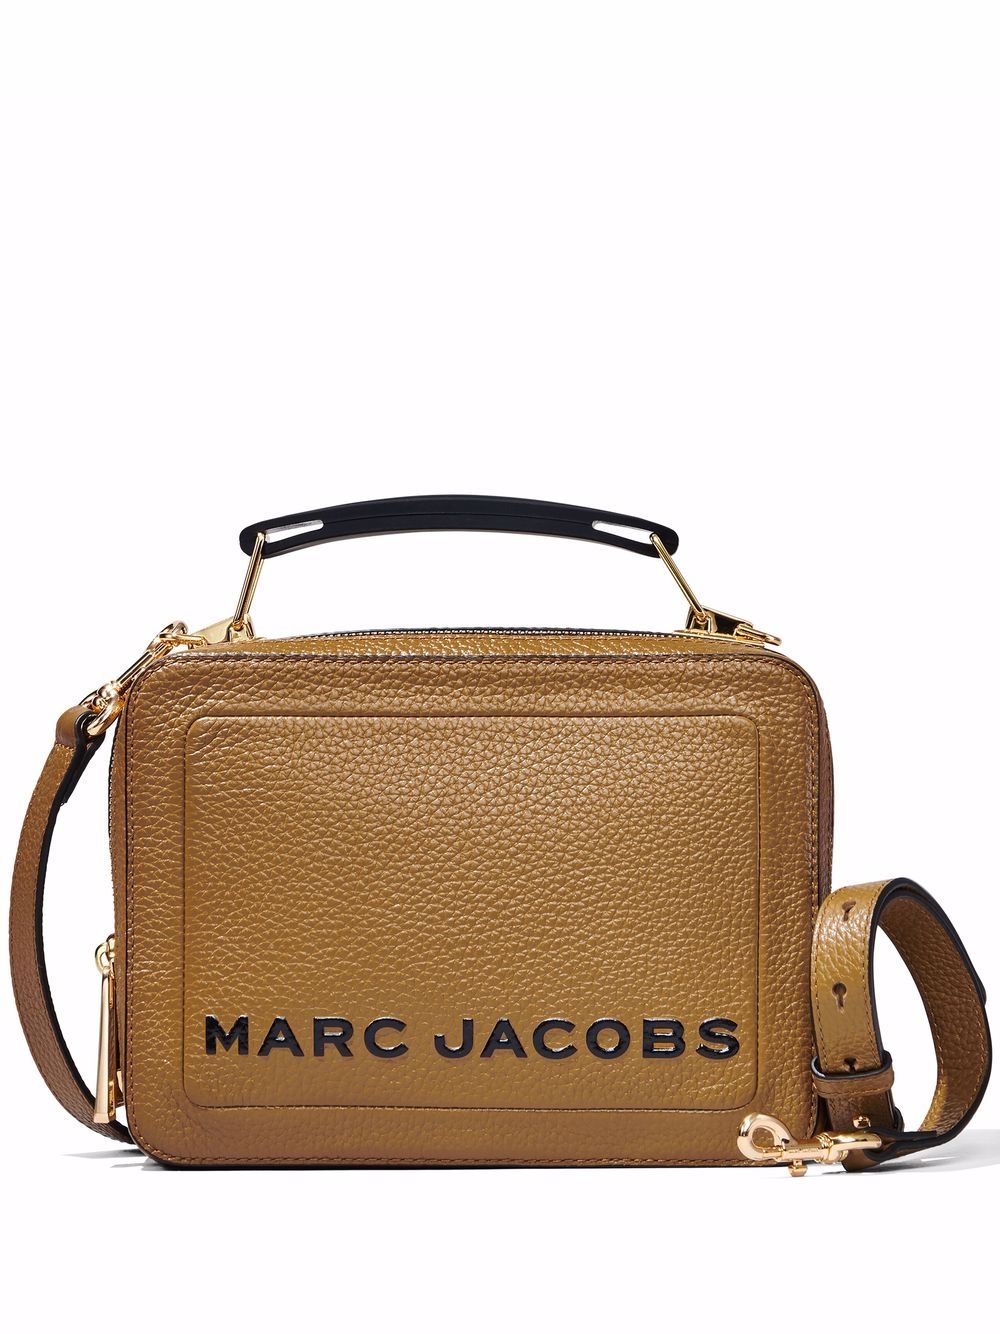 Marc Jacobs The Textured Box 23 Crossbody Bag In Brown